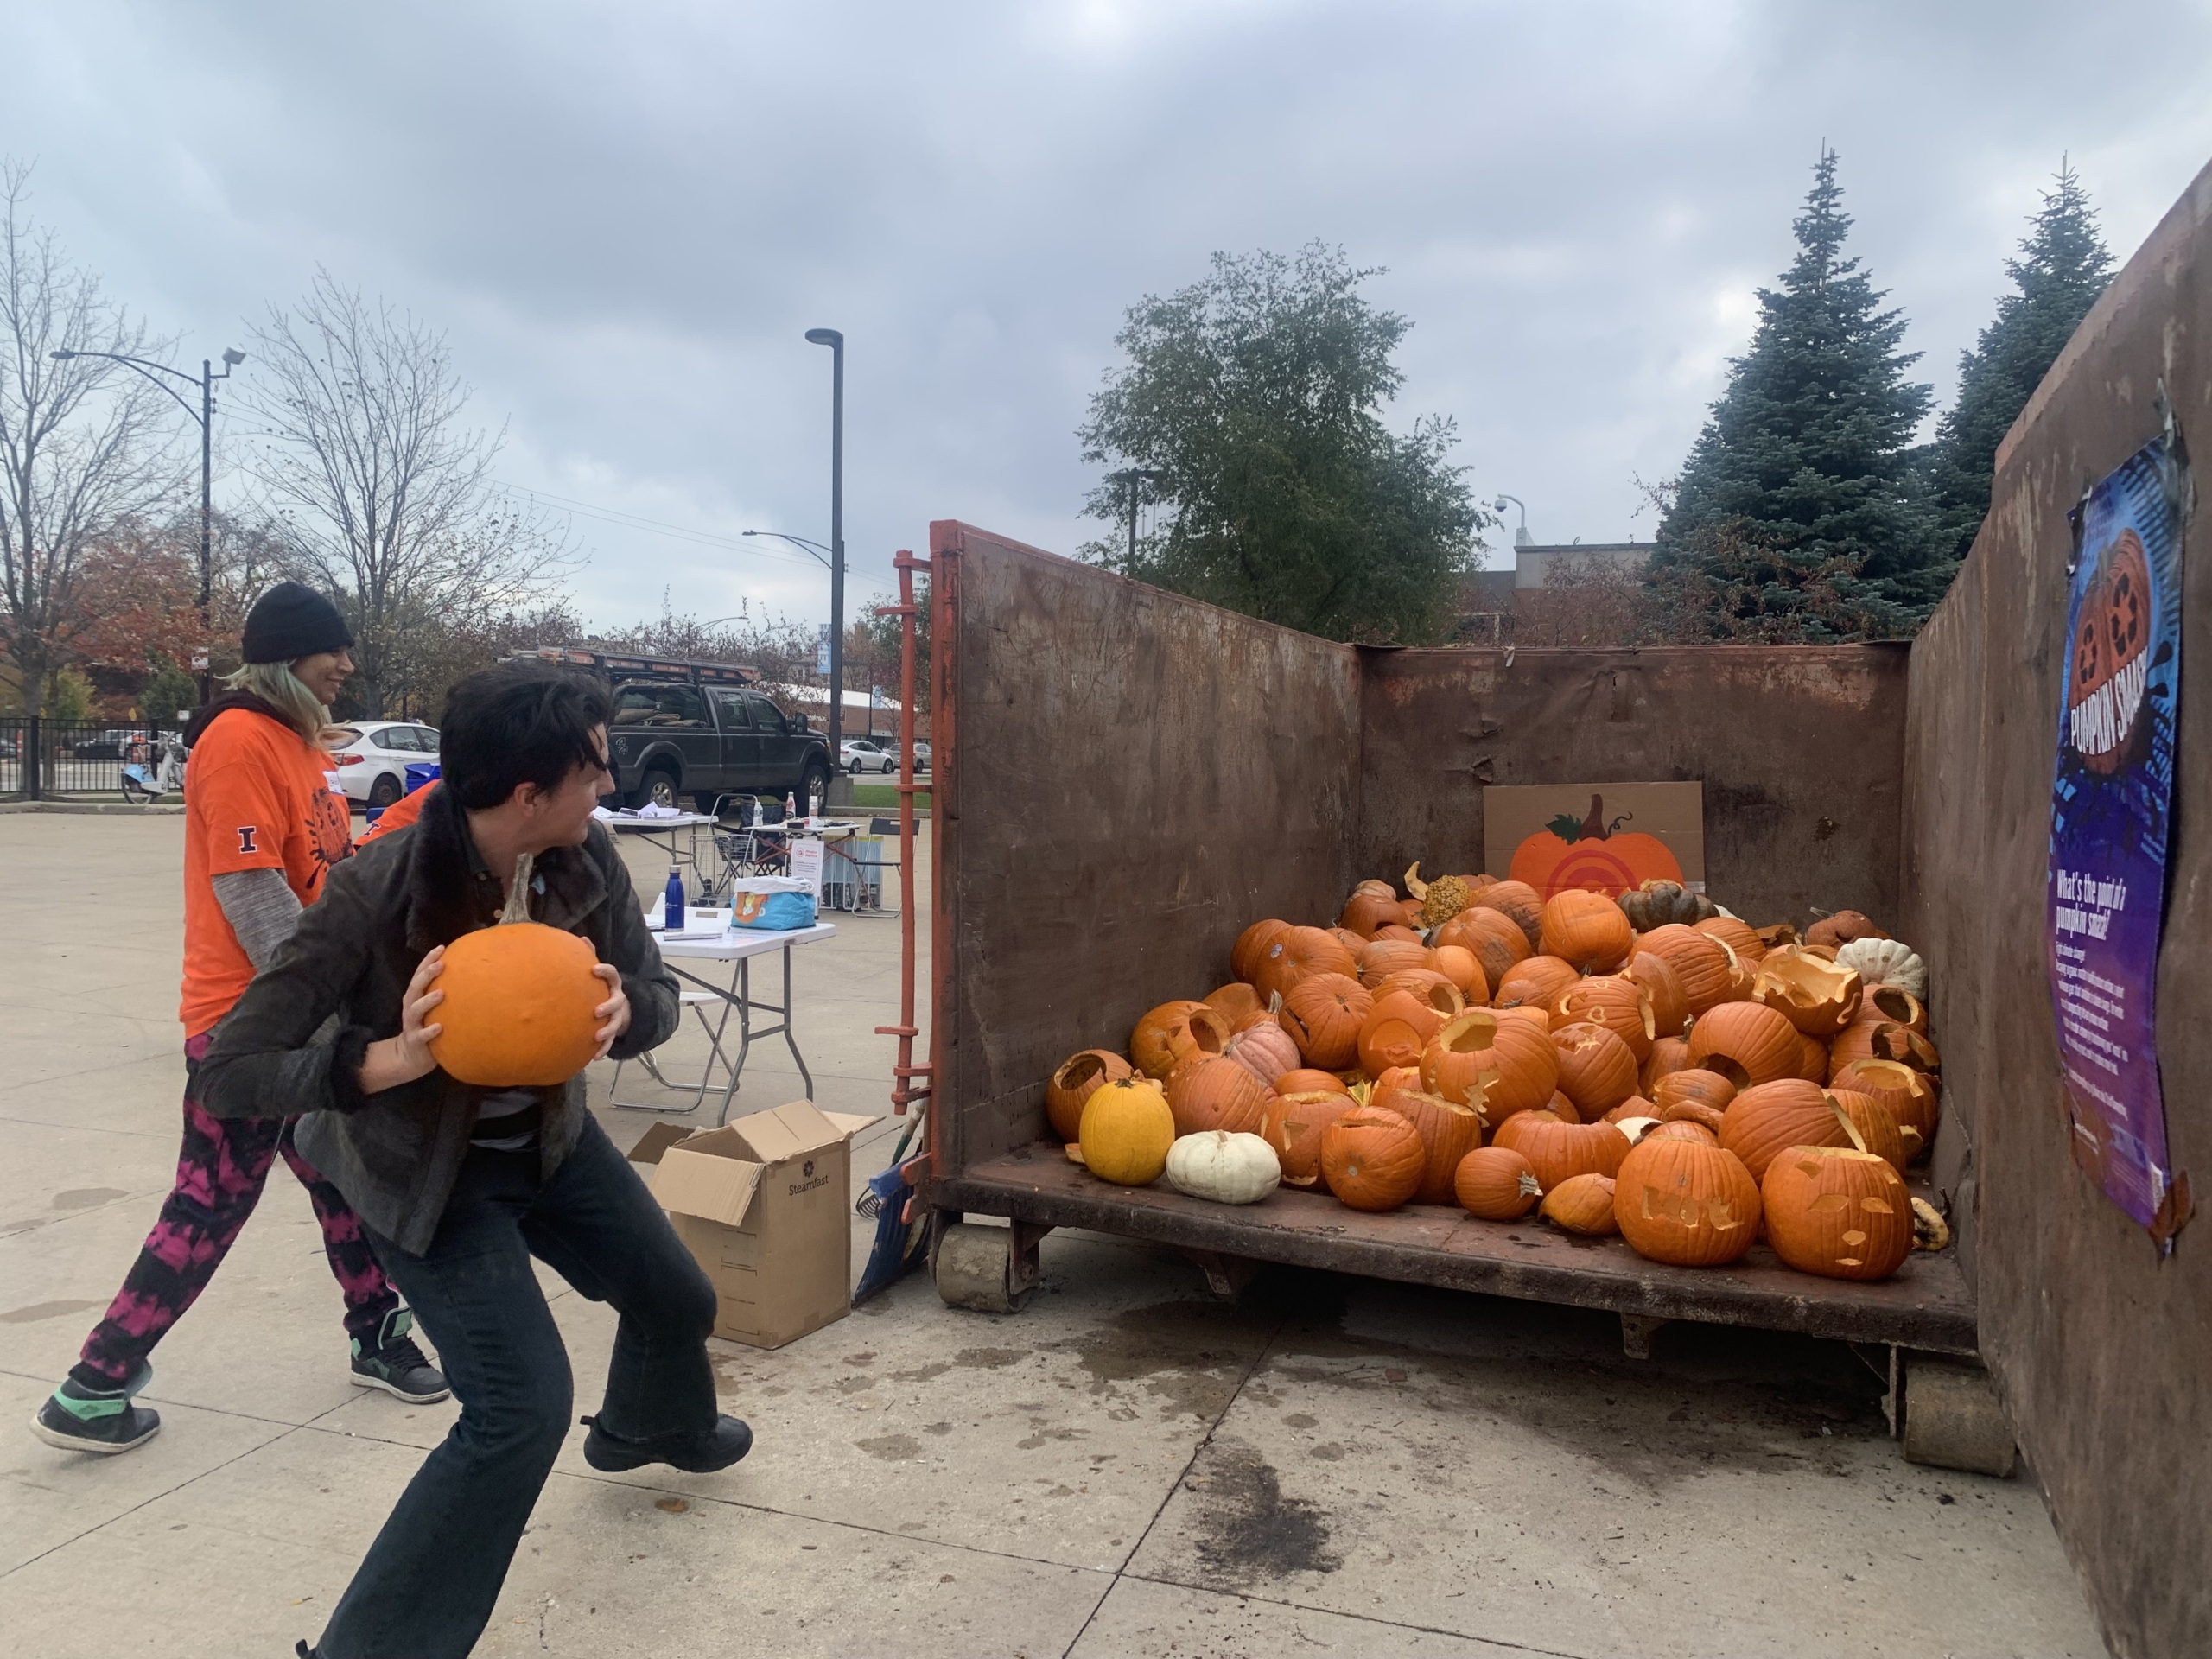 Throwing a pumpkin into a truck bed of pumpkins destined for compost